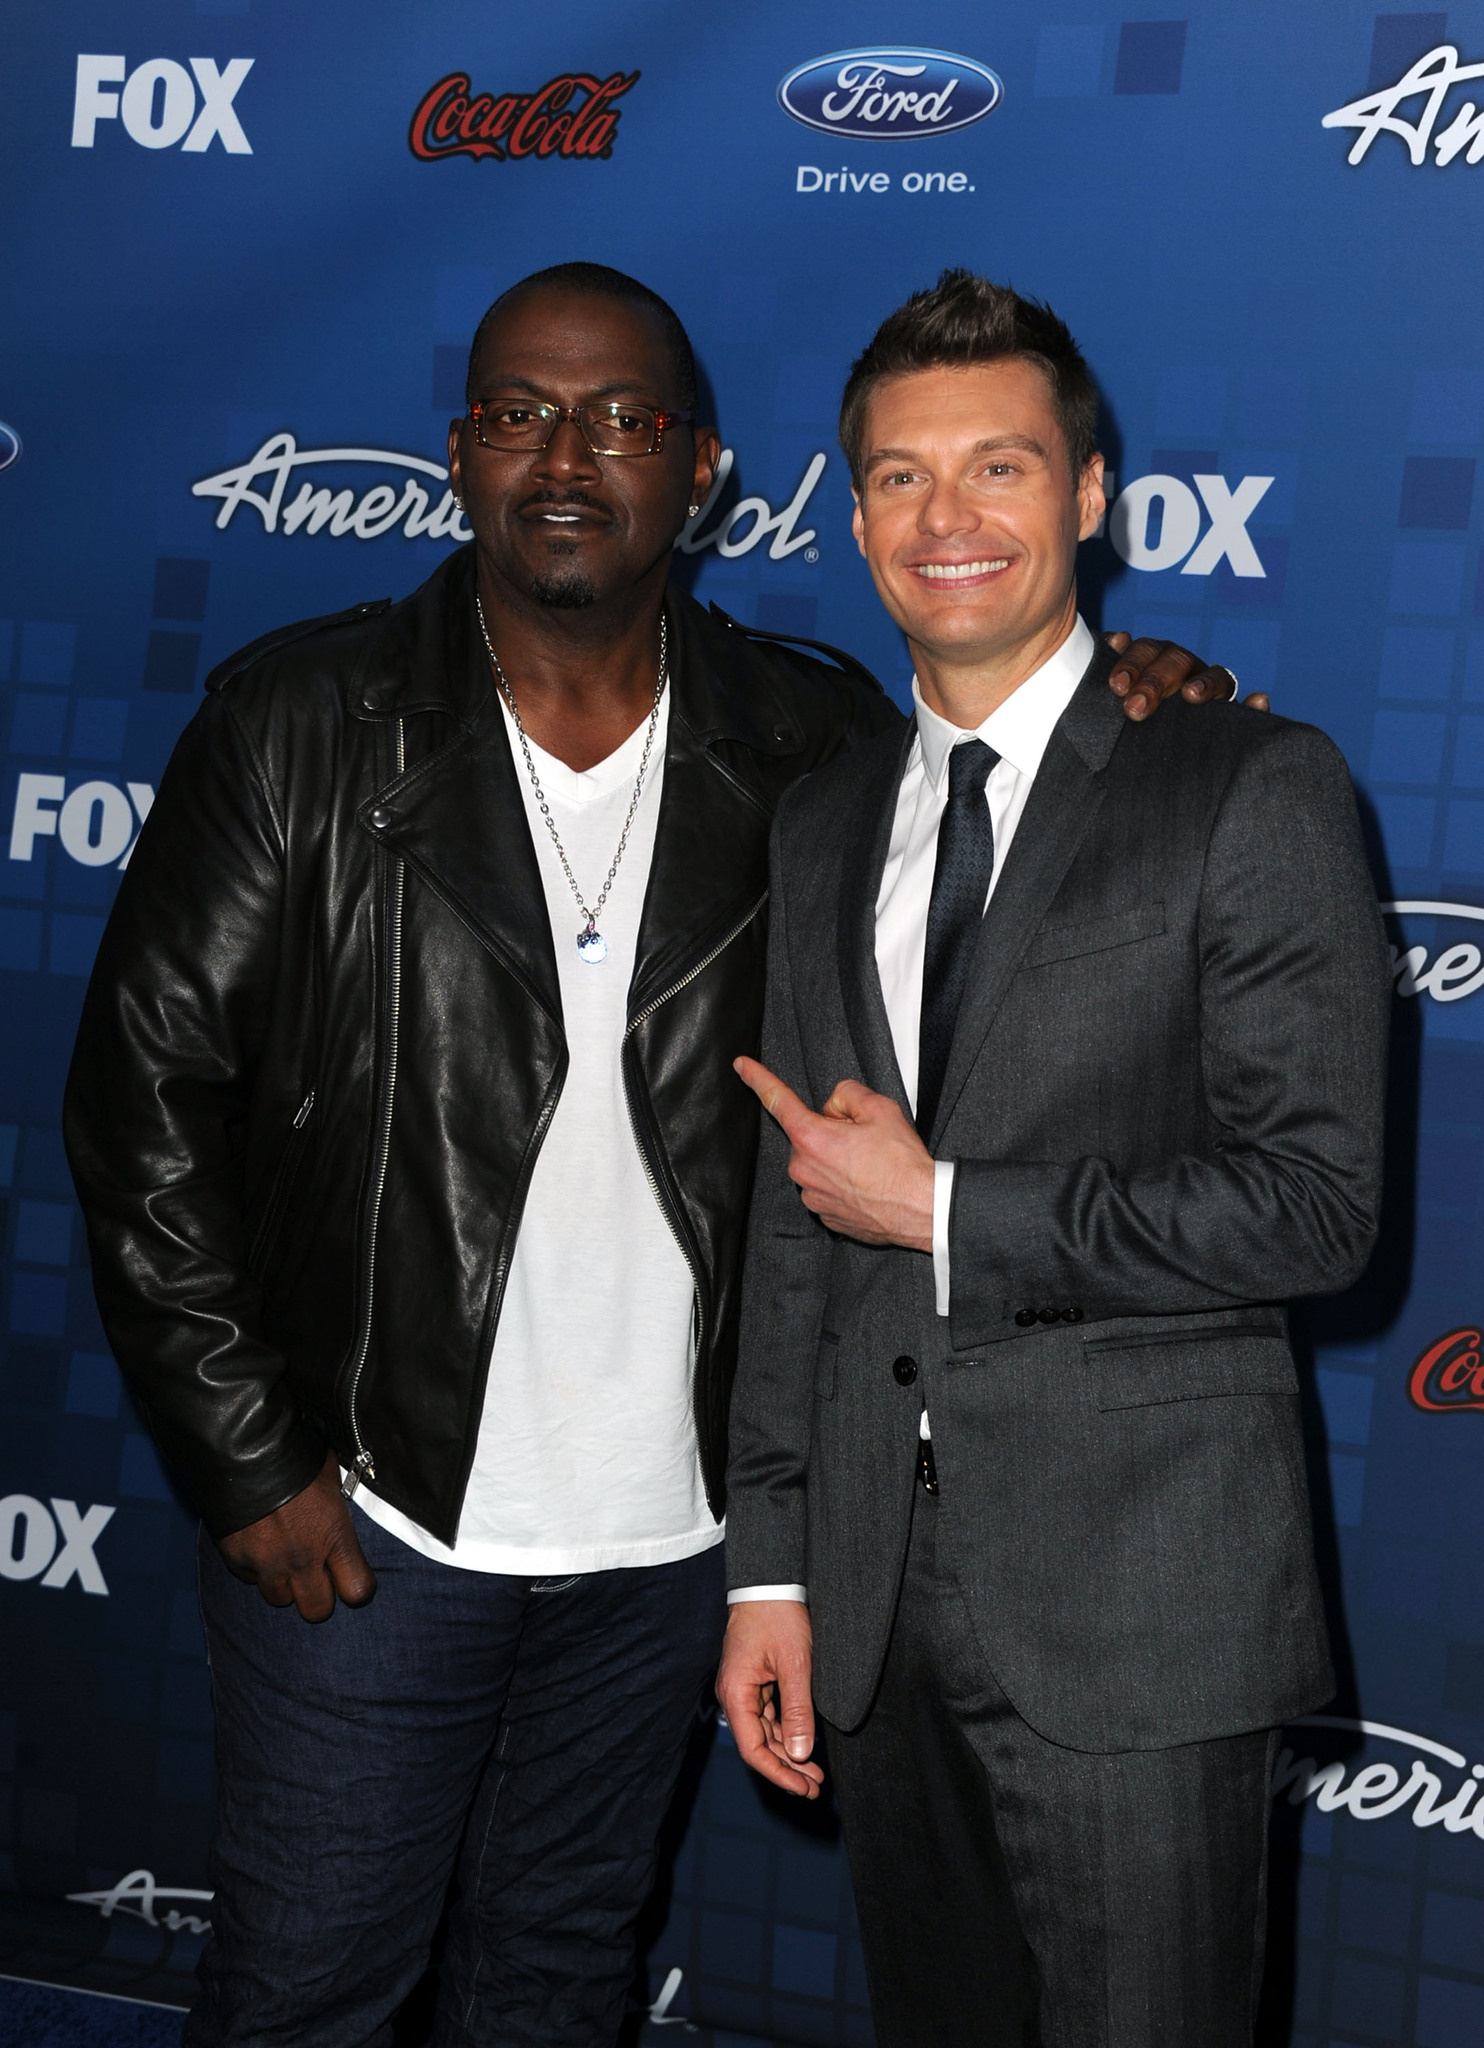 Ryan Seacrest and Randy Jackson at event of American Idol: The Search for a Superstar (2002)